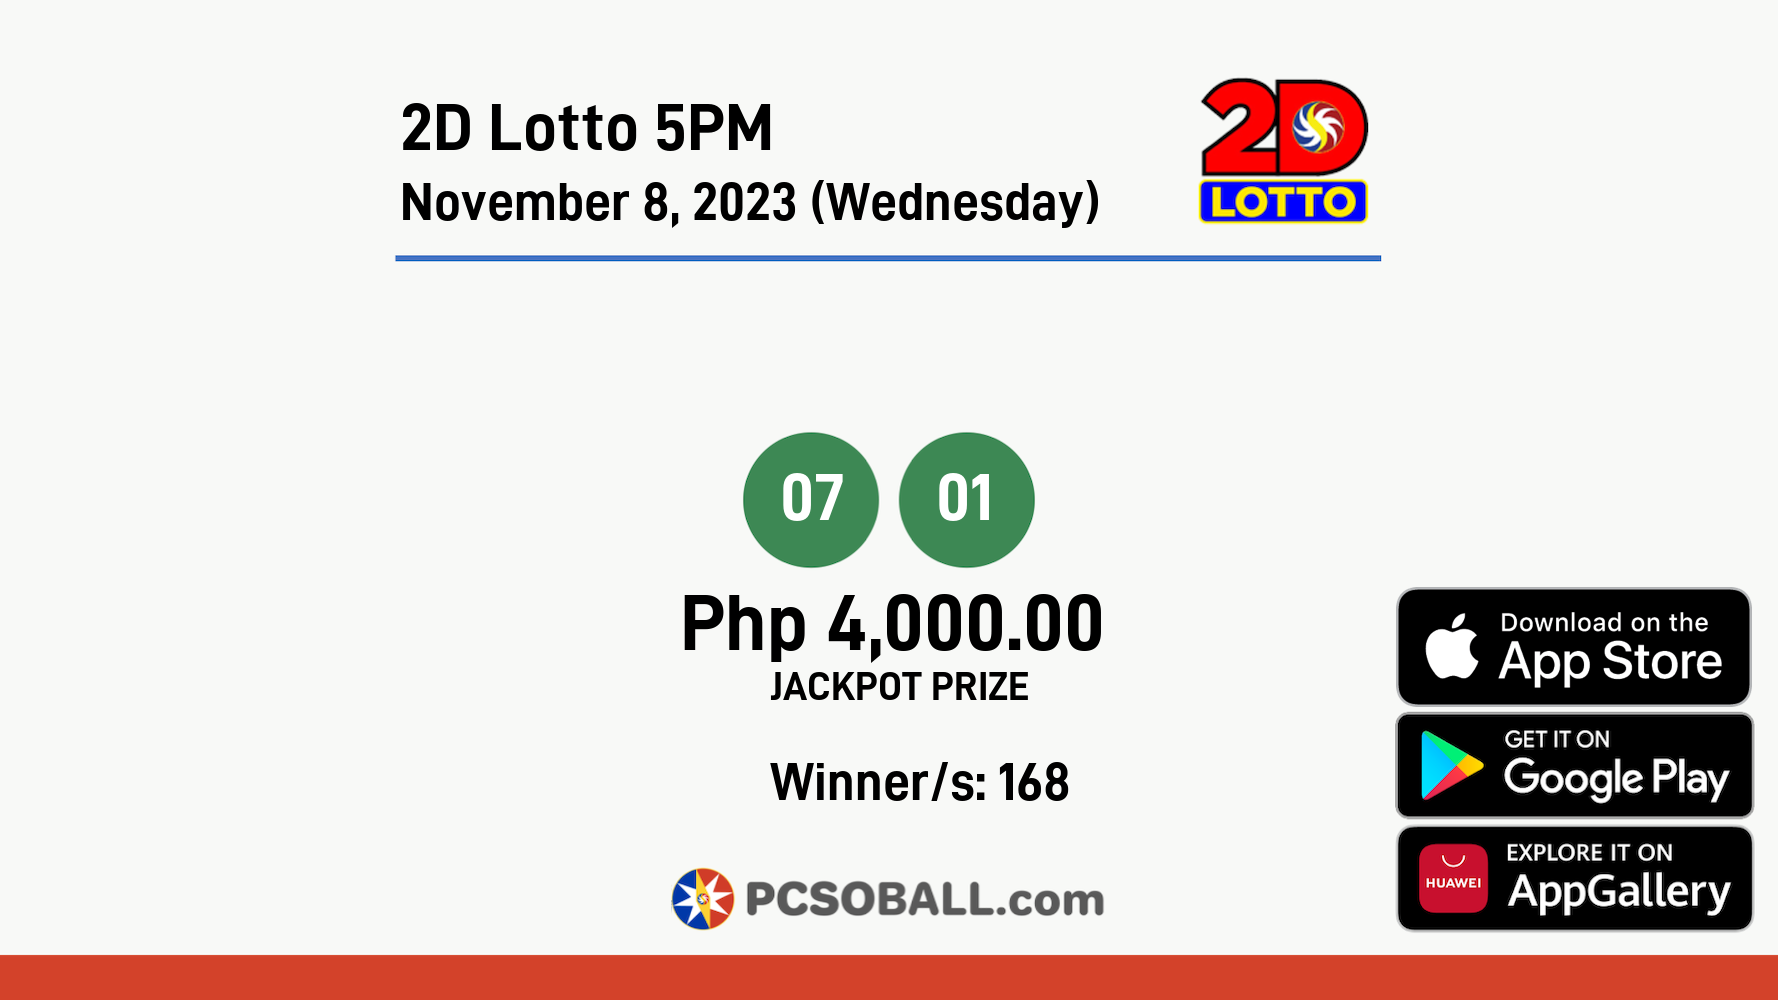 2D Lotto 5PM November 8, 2023 (Wednesday) Result